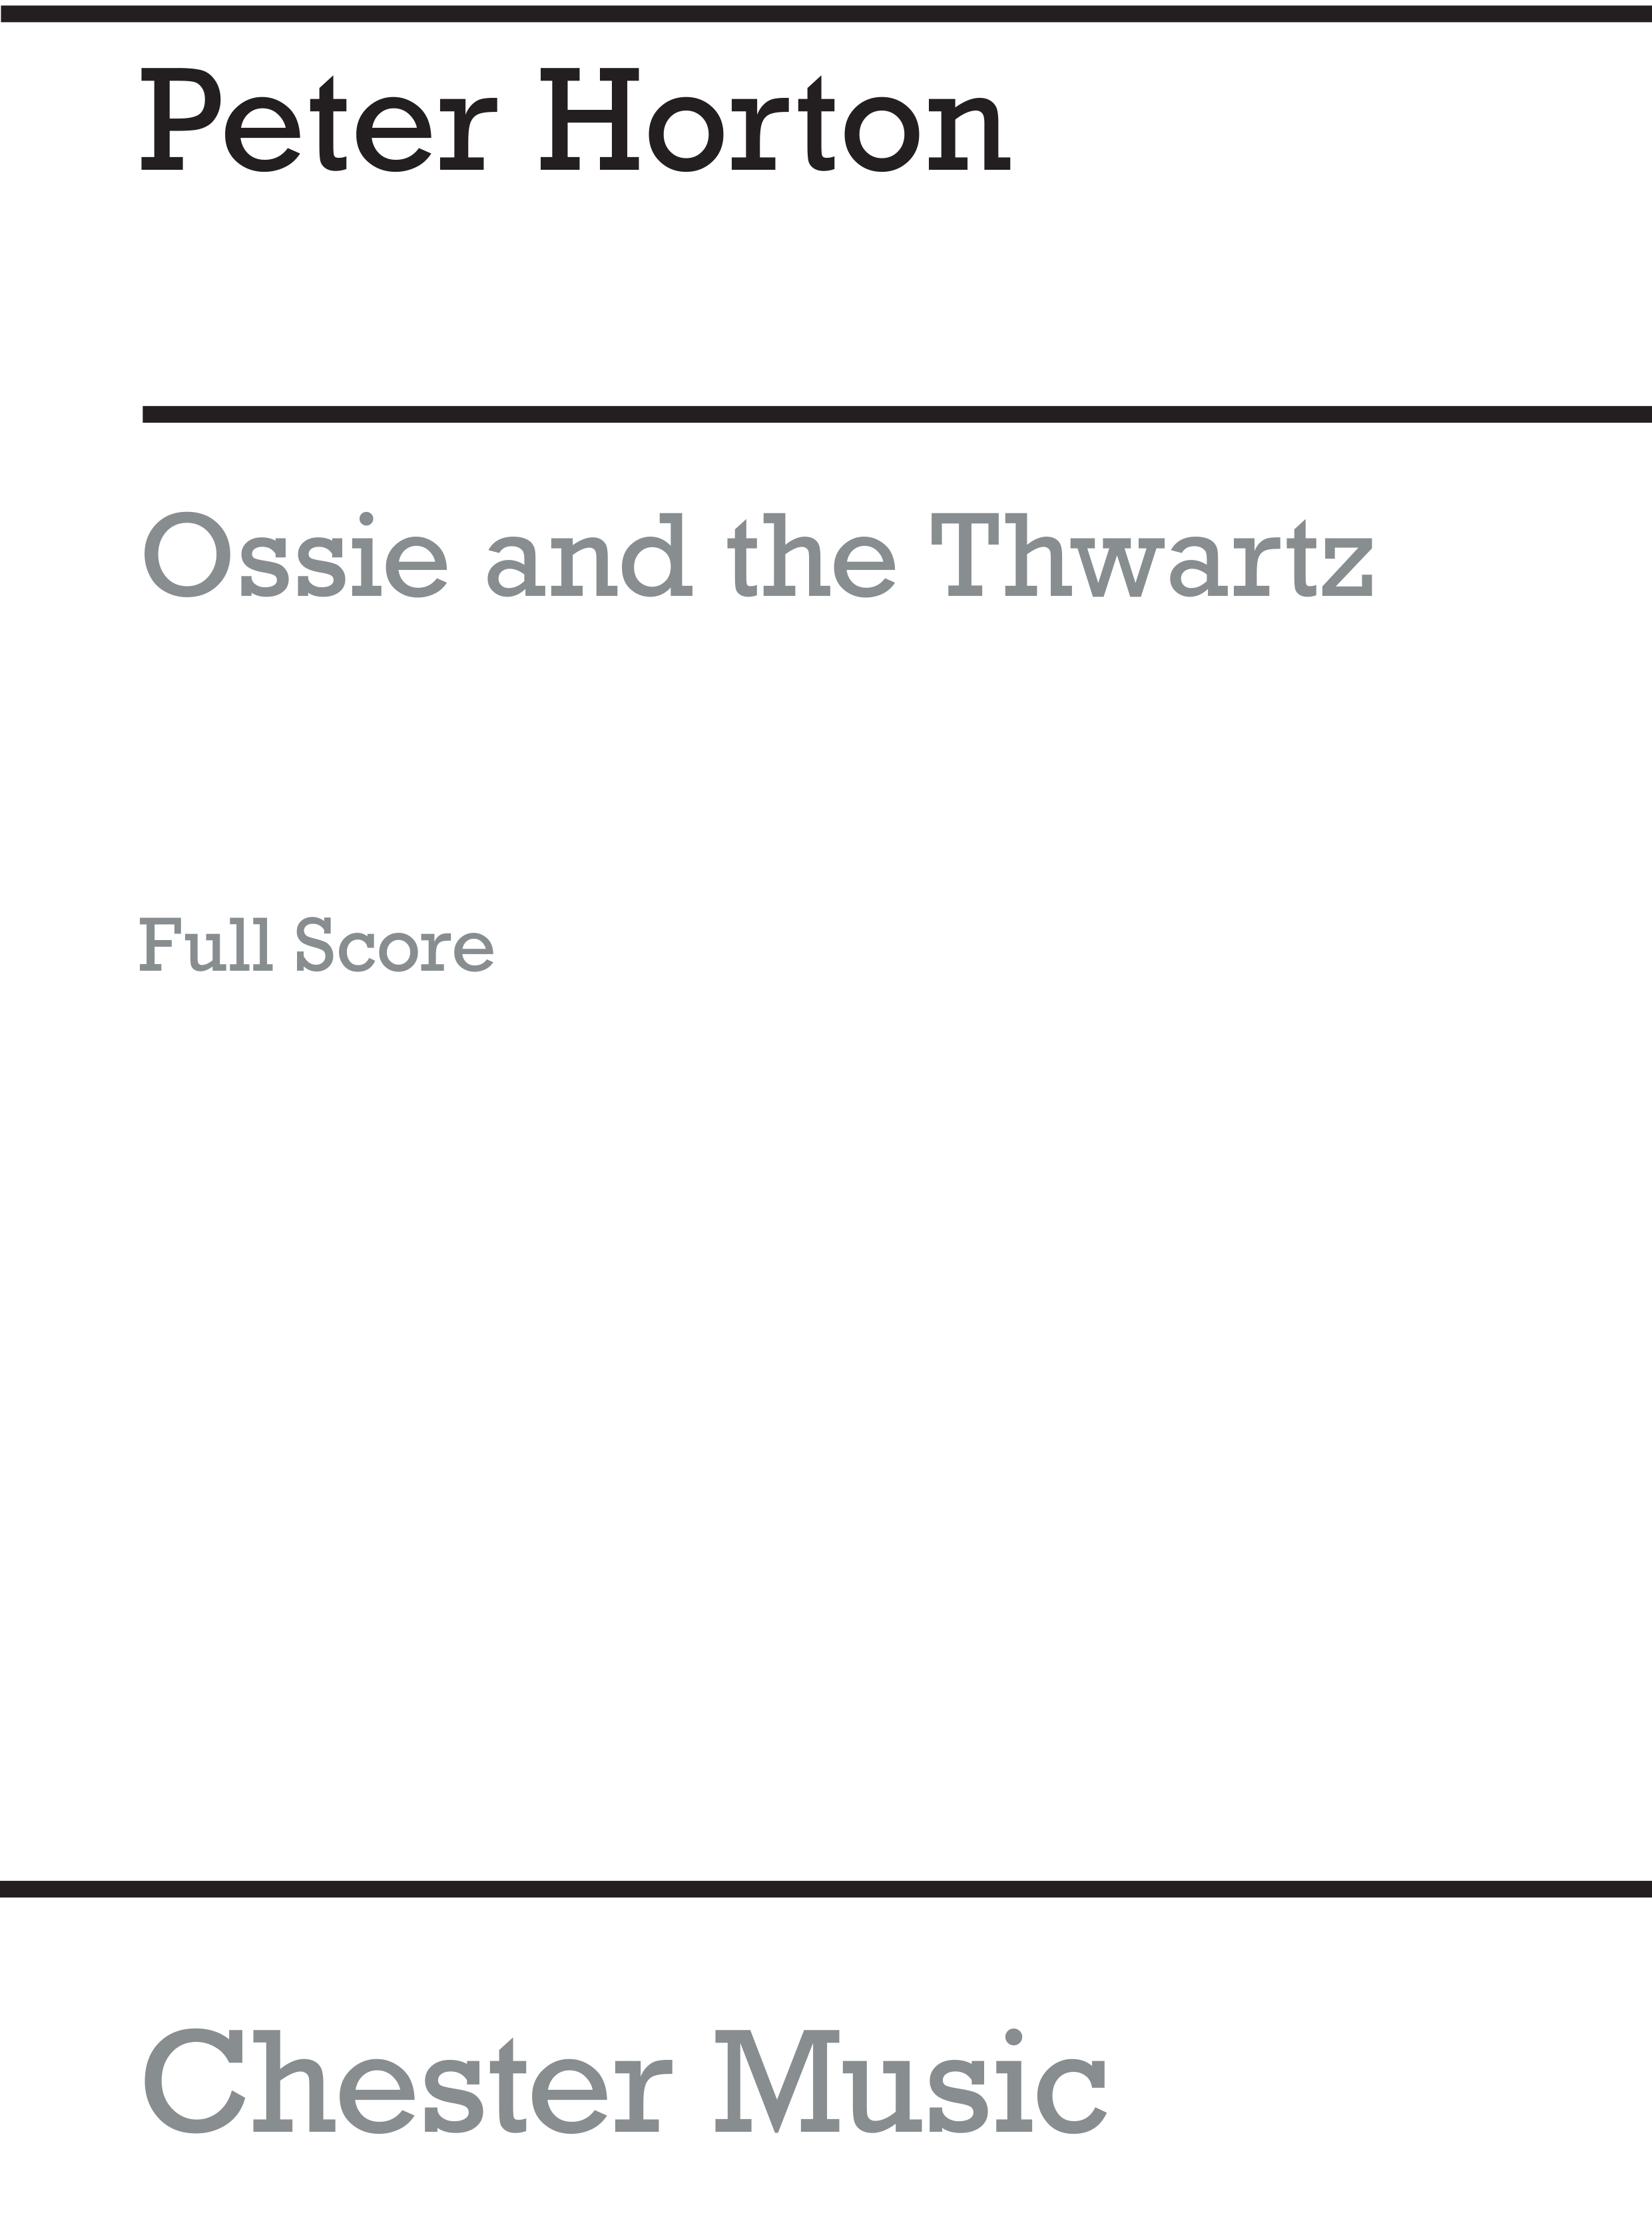 Ossie And The Thwartz Score: Piano  Vocal  Guitar: Classroom Musical